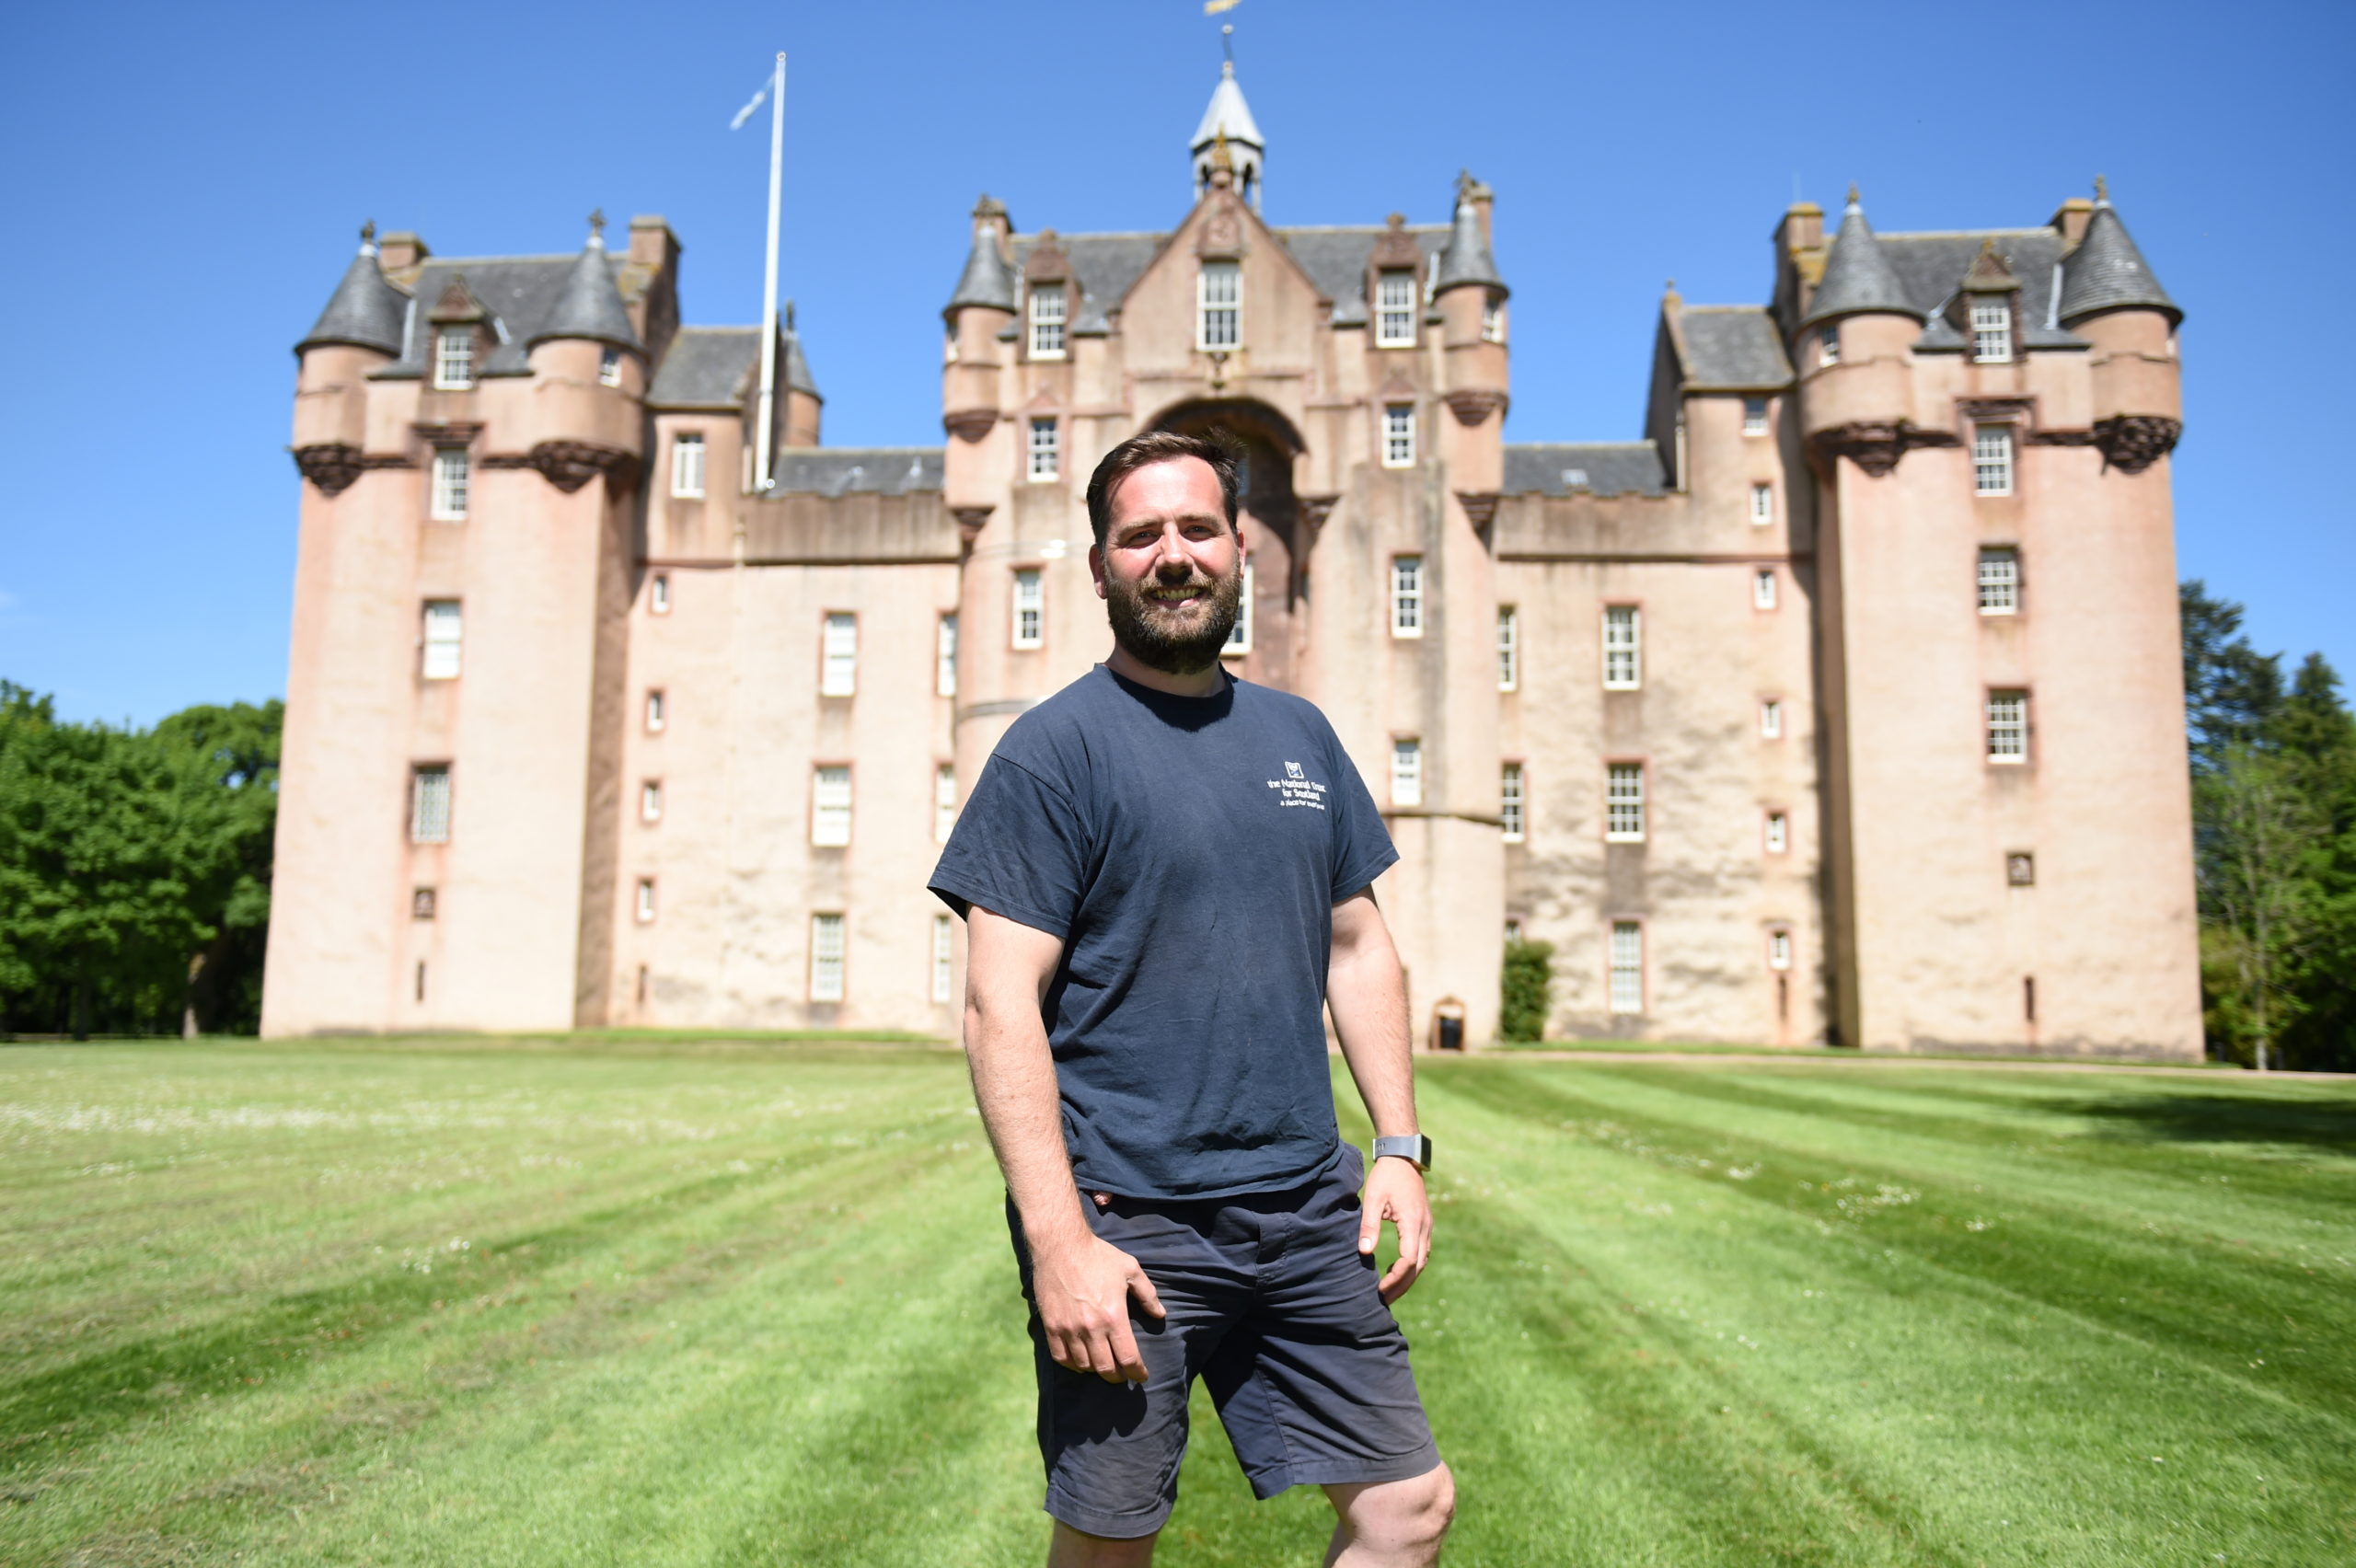 Fyvie Castle gardener, Stuart Stockley will be taking people on a fascinating tour round the Walled Garden of Scottish Fruit.